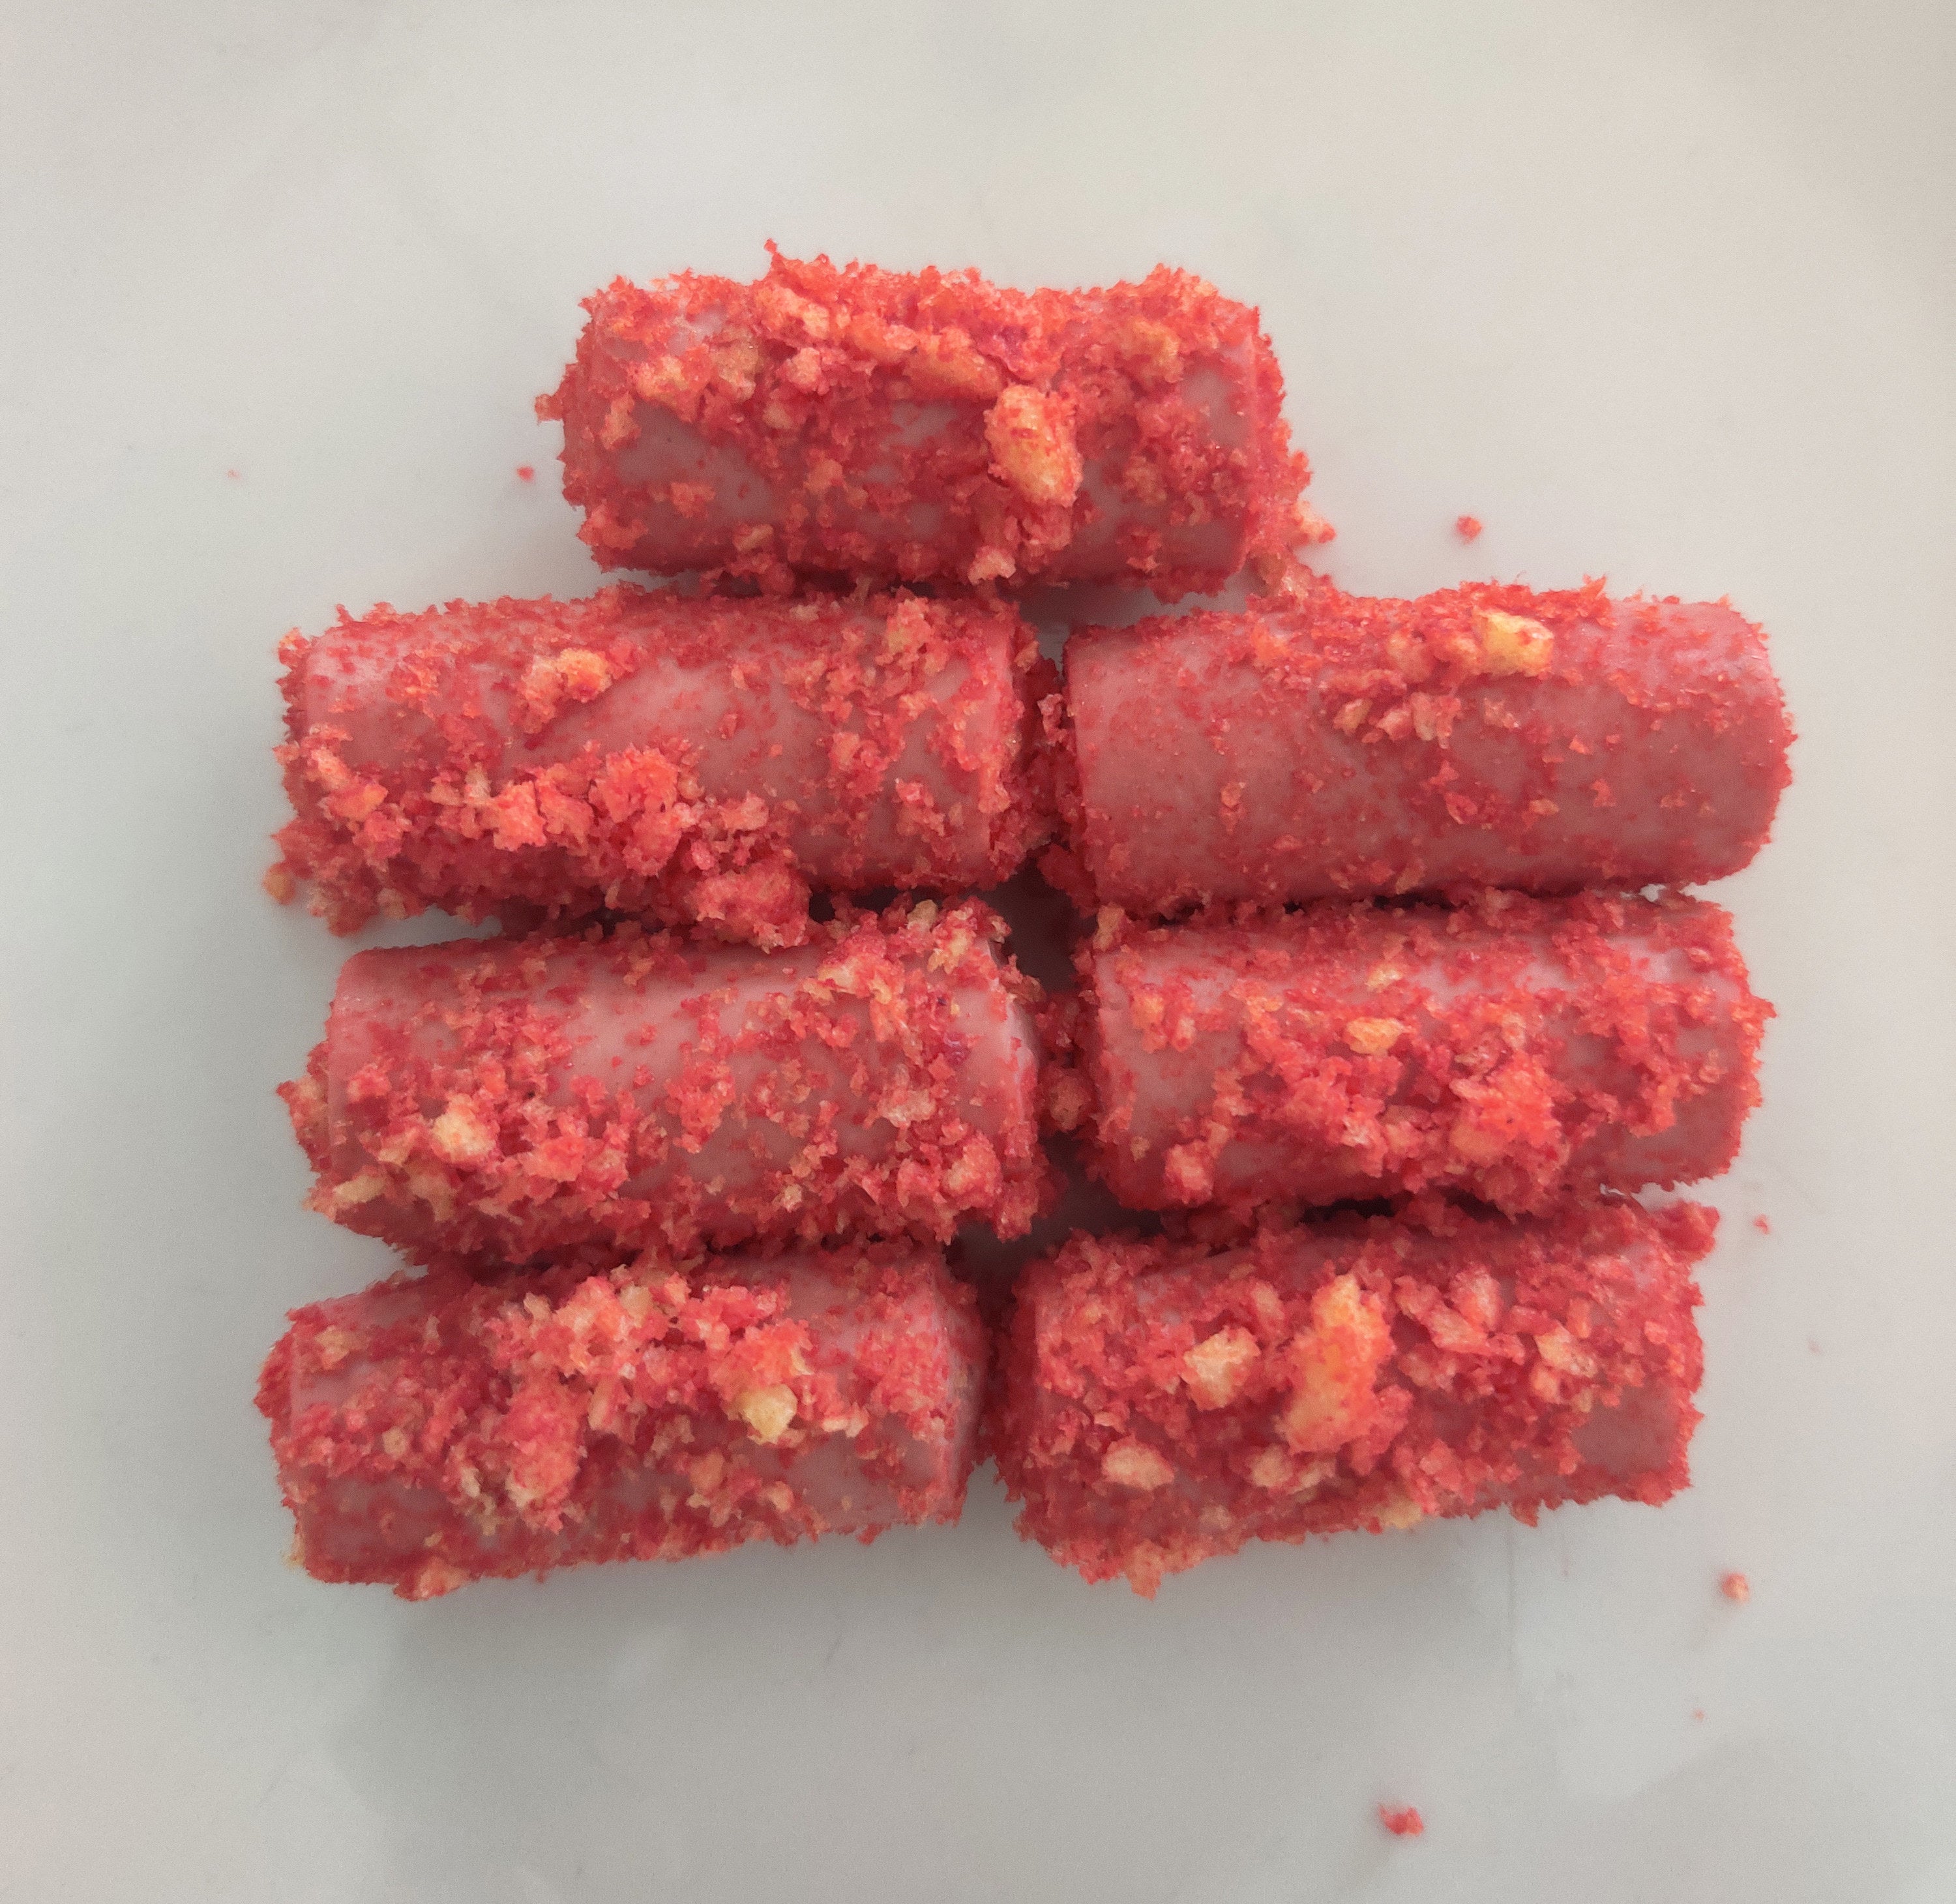 The finished and somewhat unsightly product: seven Vienna sausages covered in bright-red crushed Cheetos